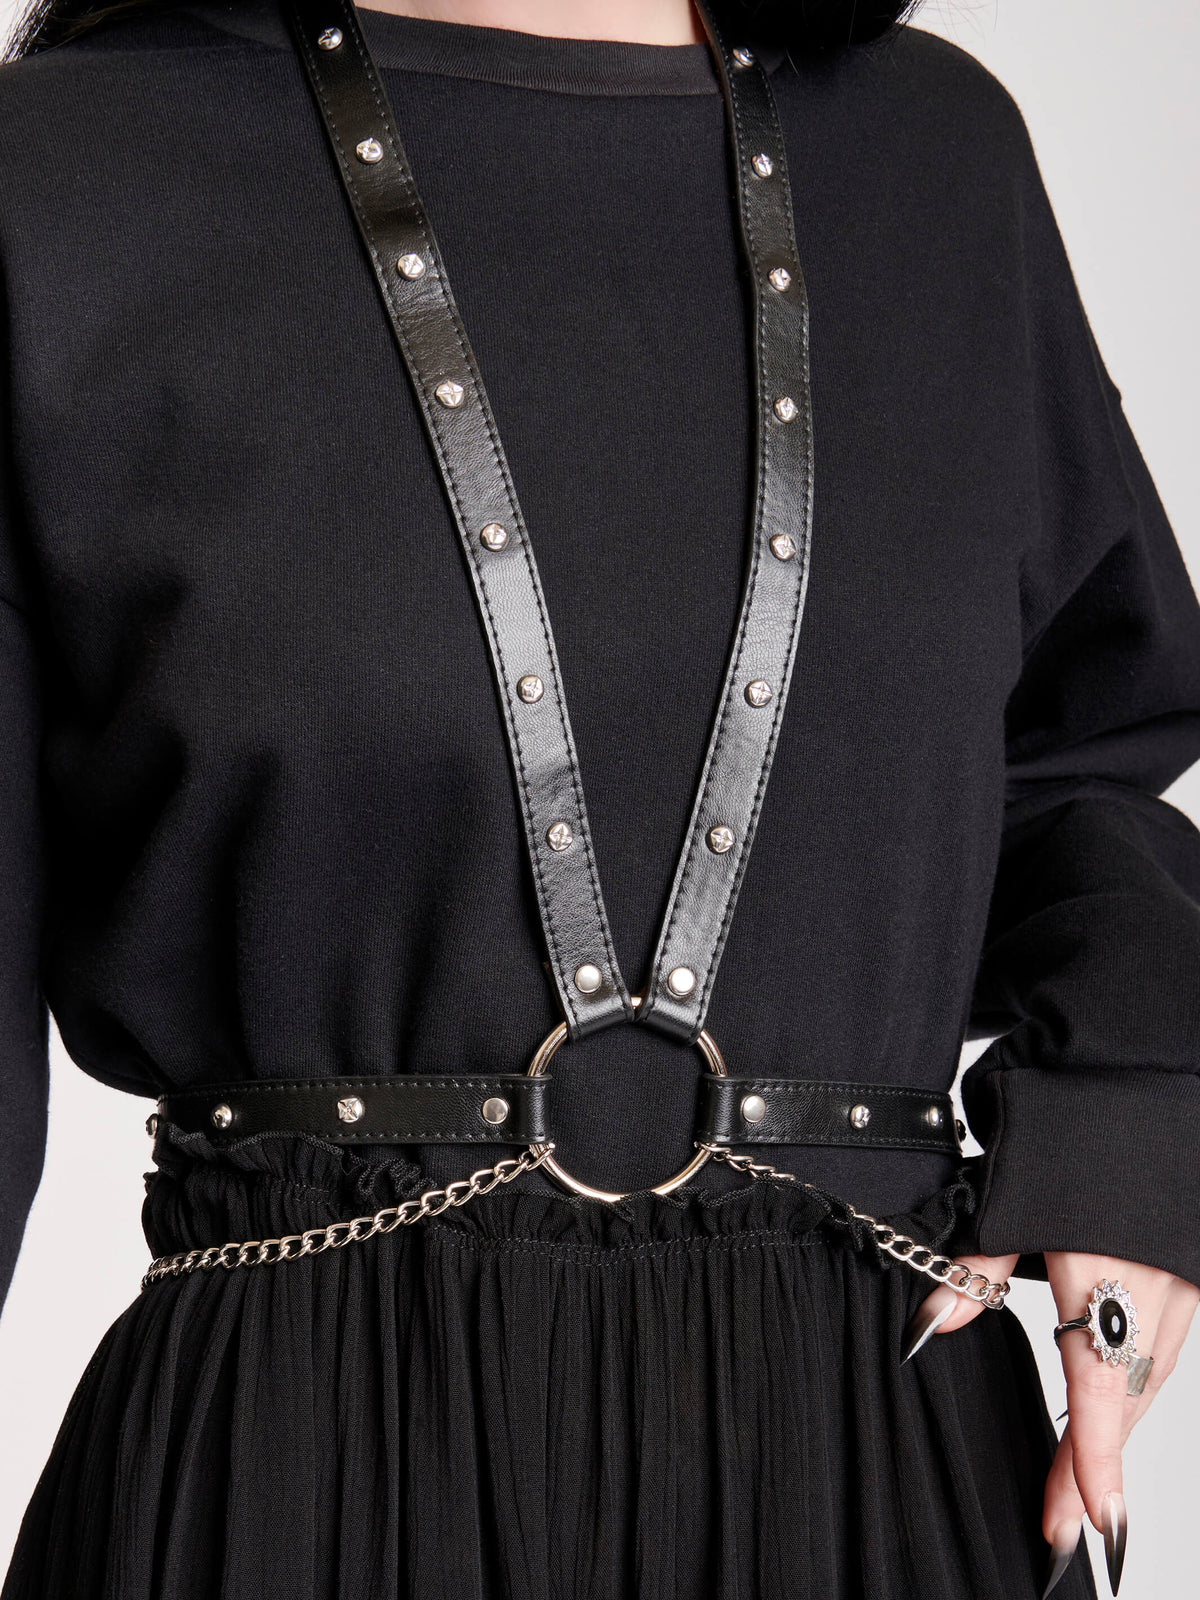 BODY HARNESS WITH SILVER CHAINS AND PU STRAPS STUDDED WITH SILVER RIVETS JOIN BY AN O-RING AT CENTER FRONT